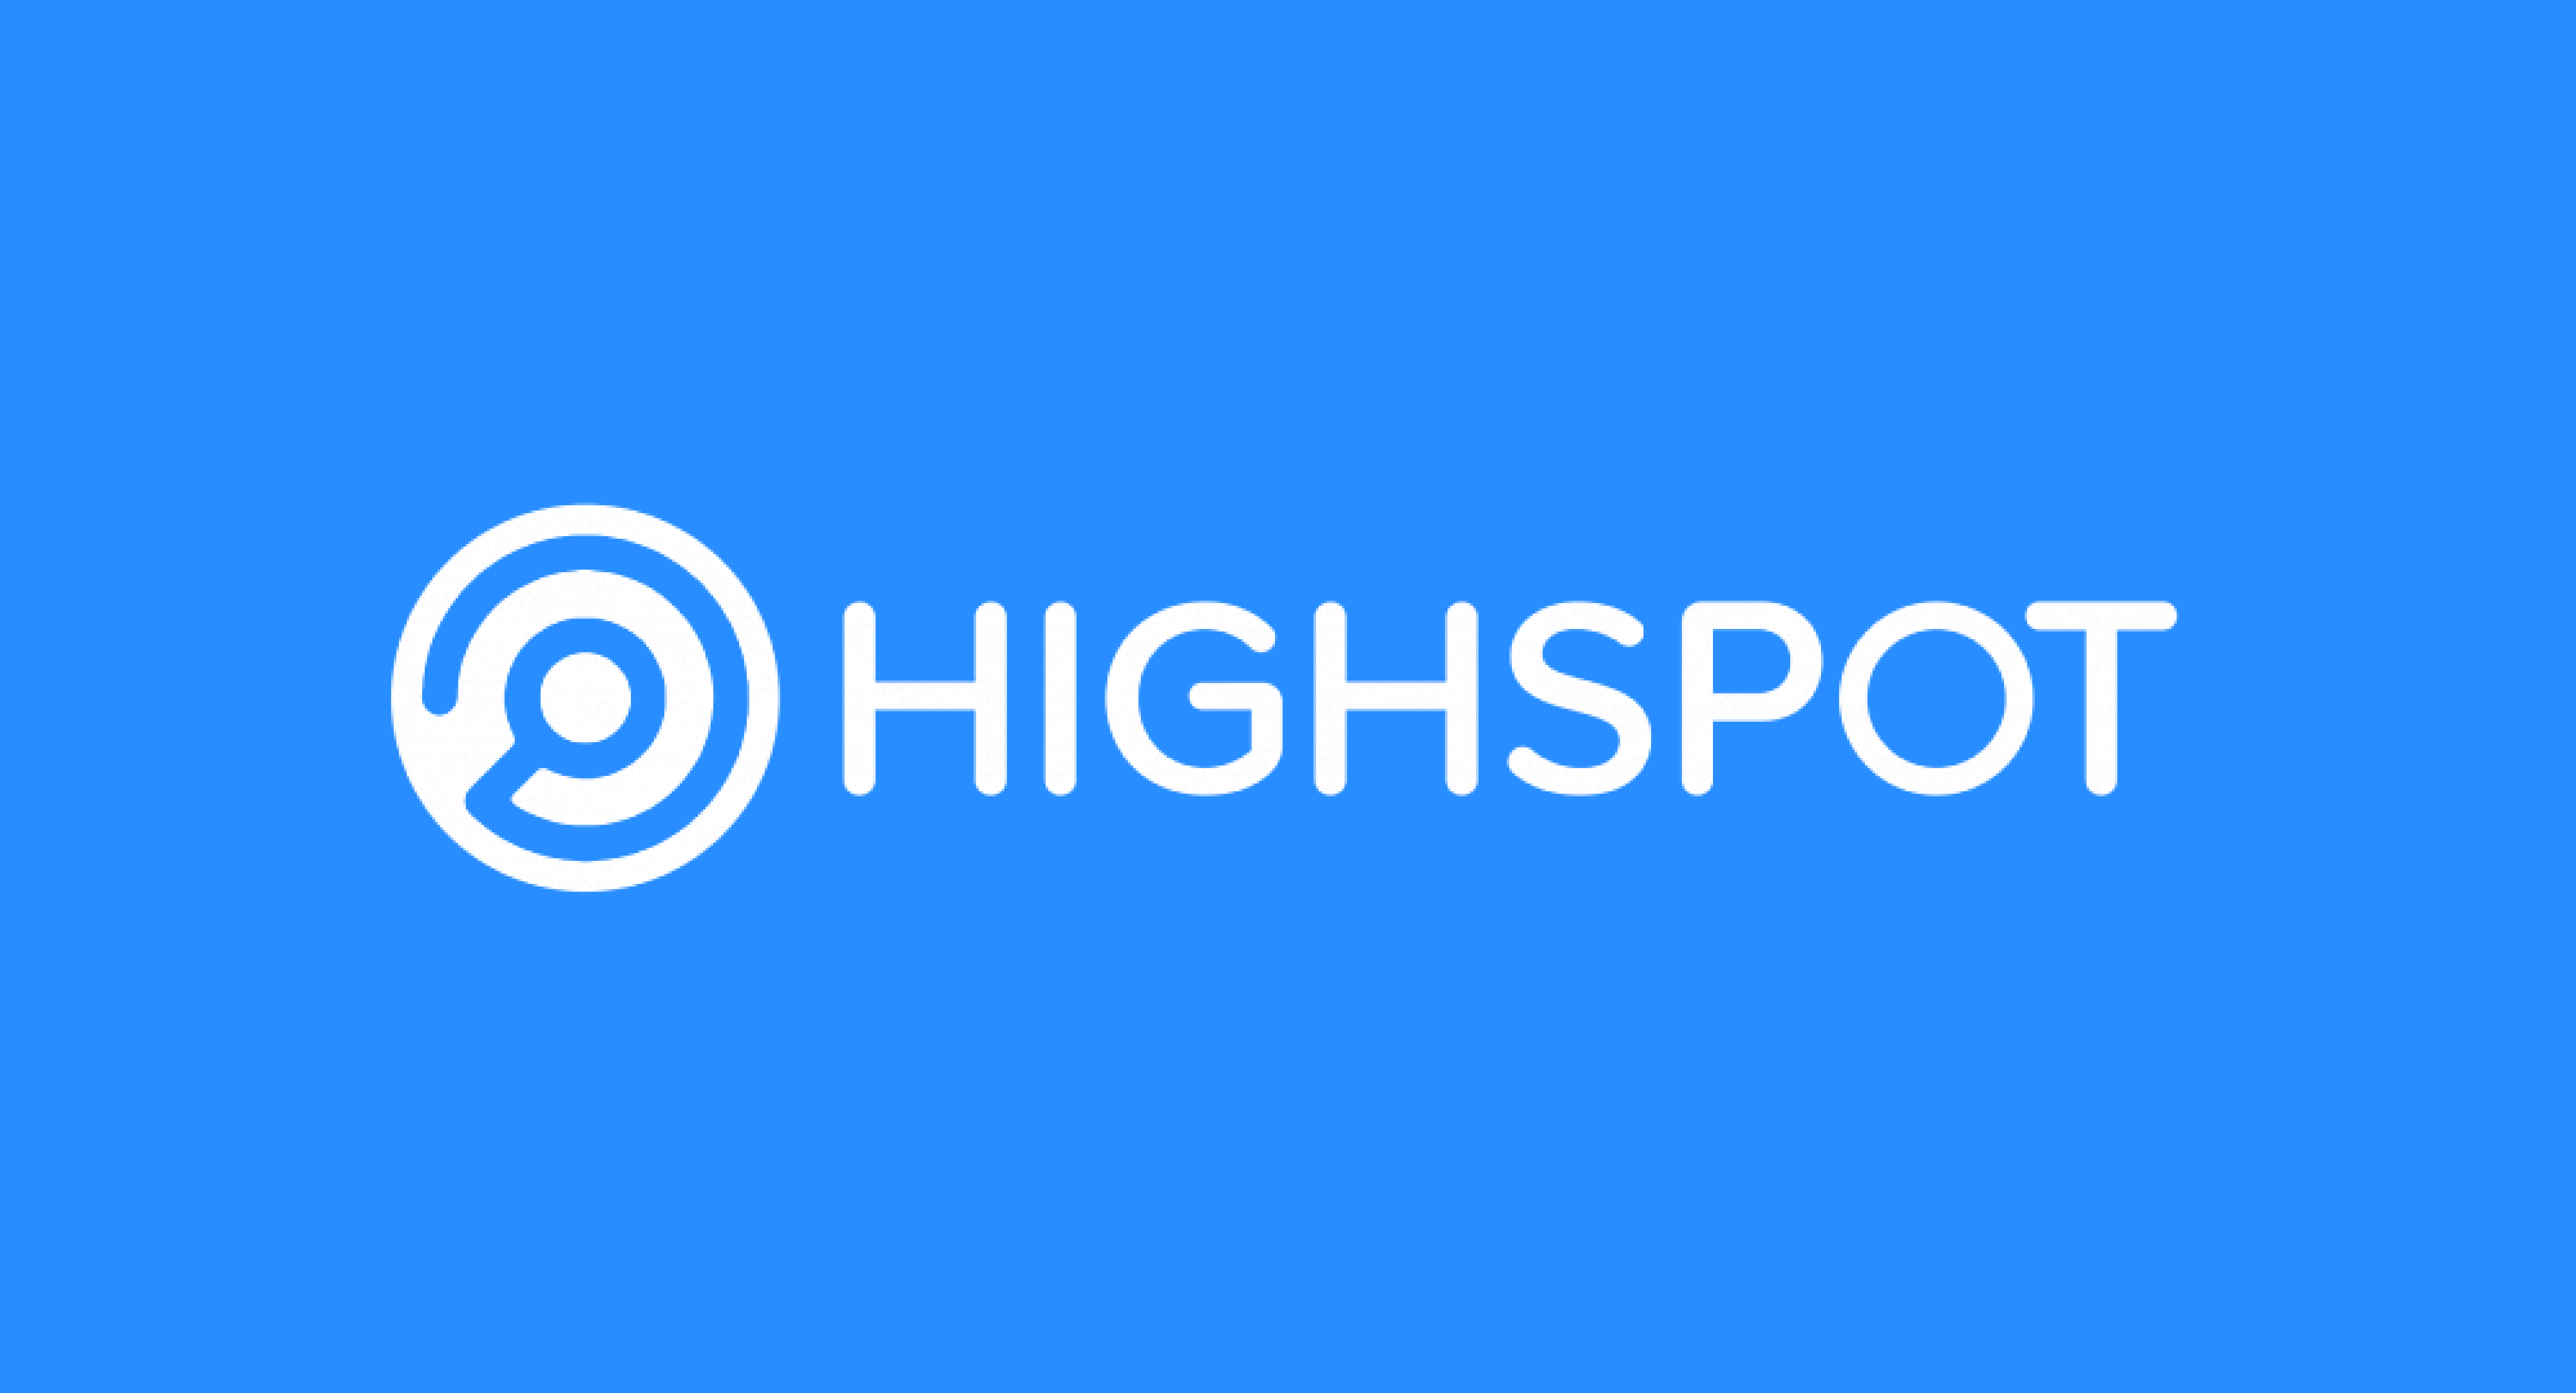 85% of closed opportunities won from Highspot influenced by G2